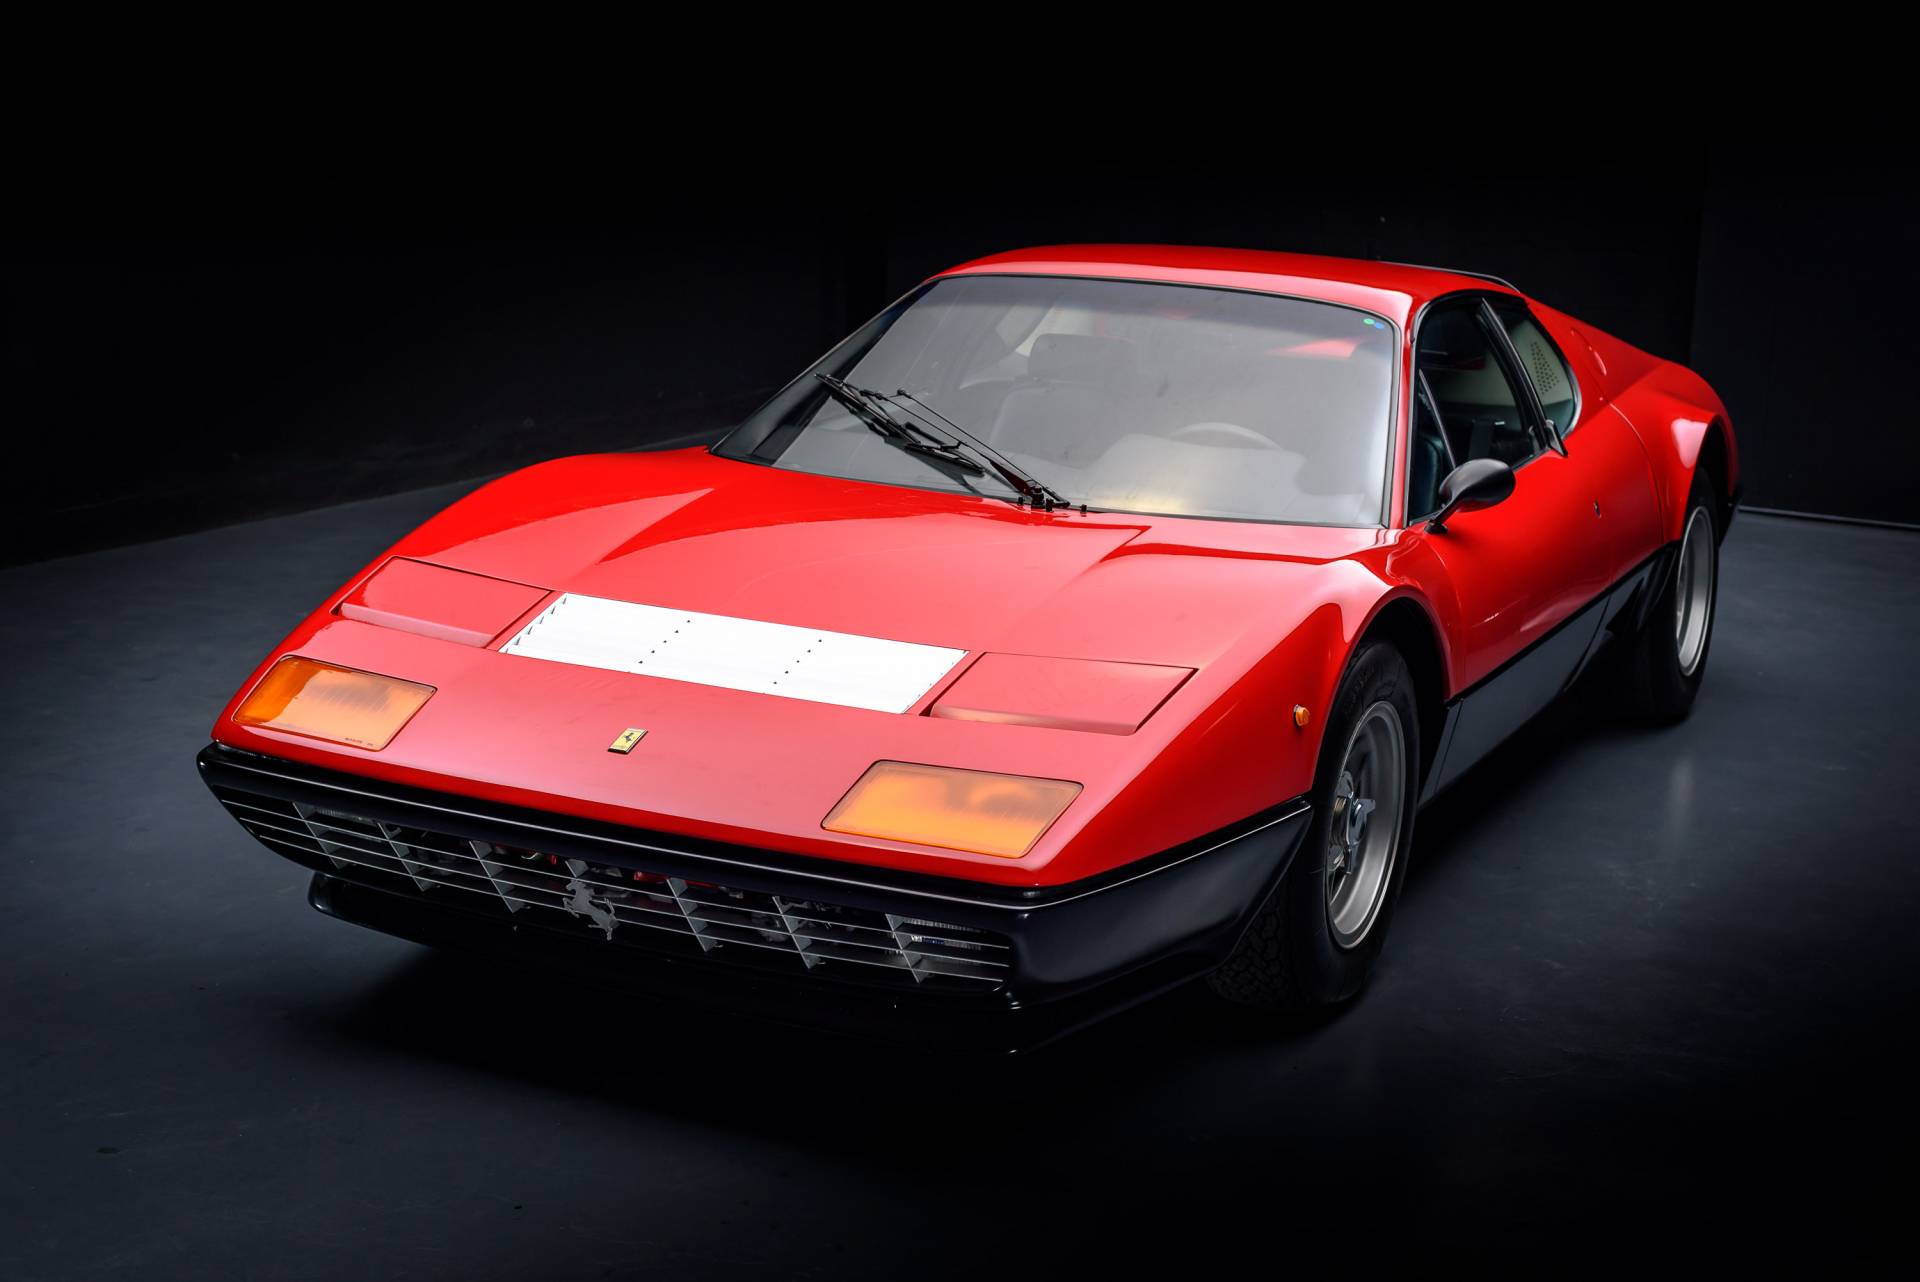 For Sale Ferrari 512 BB 1979 Offered For Price On Request